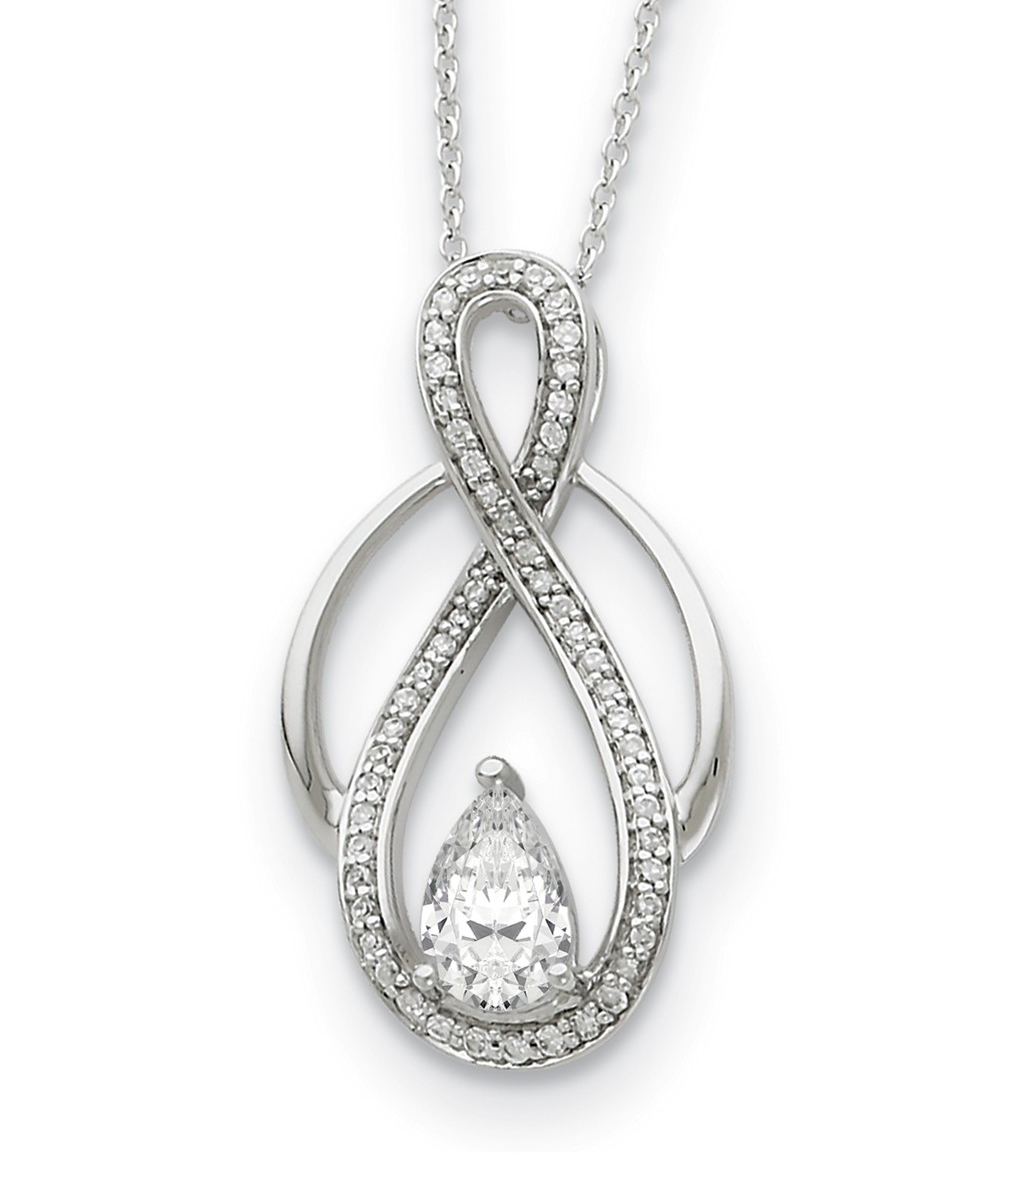 'Tears To Strength' CZ Pendant Necklace, Rhodium-Plated Sterling Silver.